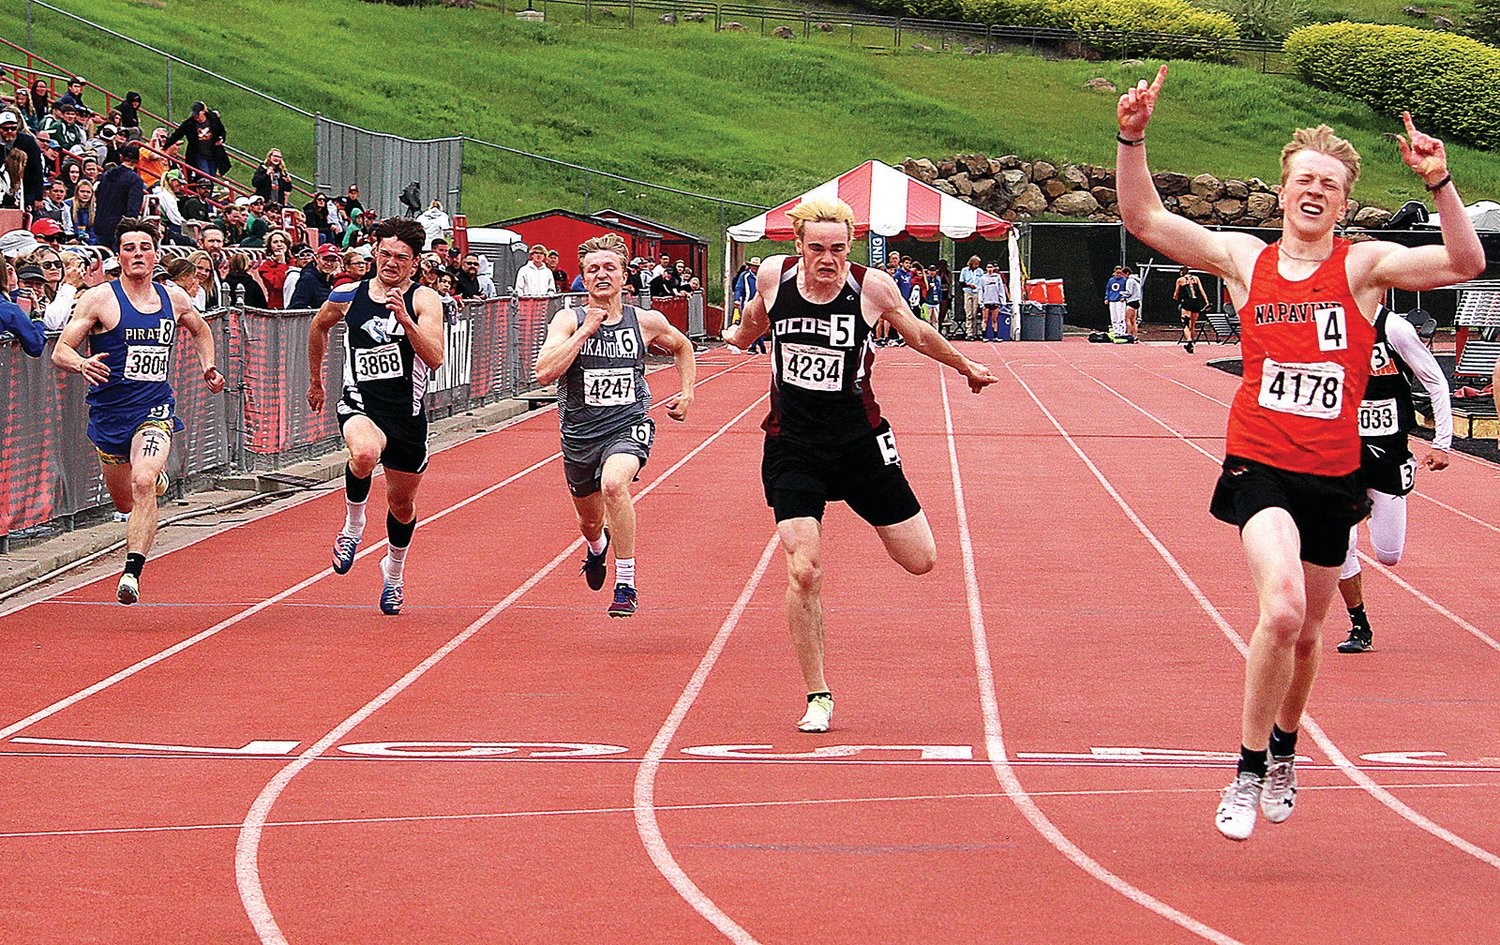 Napavine's Lucas Dahl wins the State 2B 200-meter dash, his second state title at the State 1B/2B/1A Track and Field Championships in Cheney, Wash.